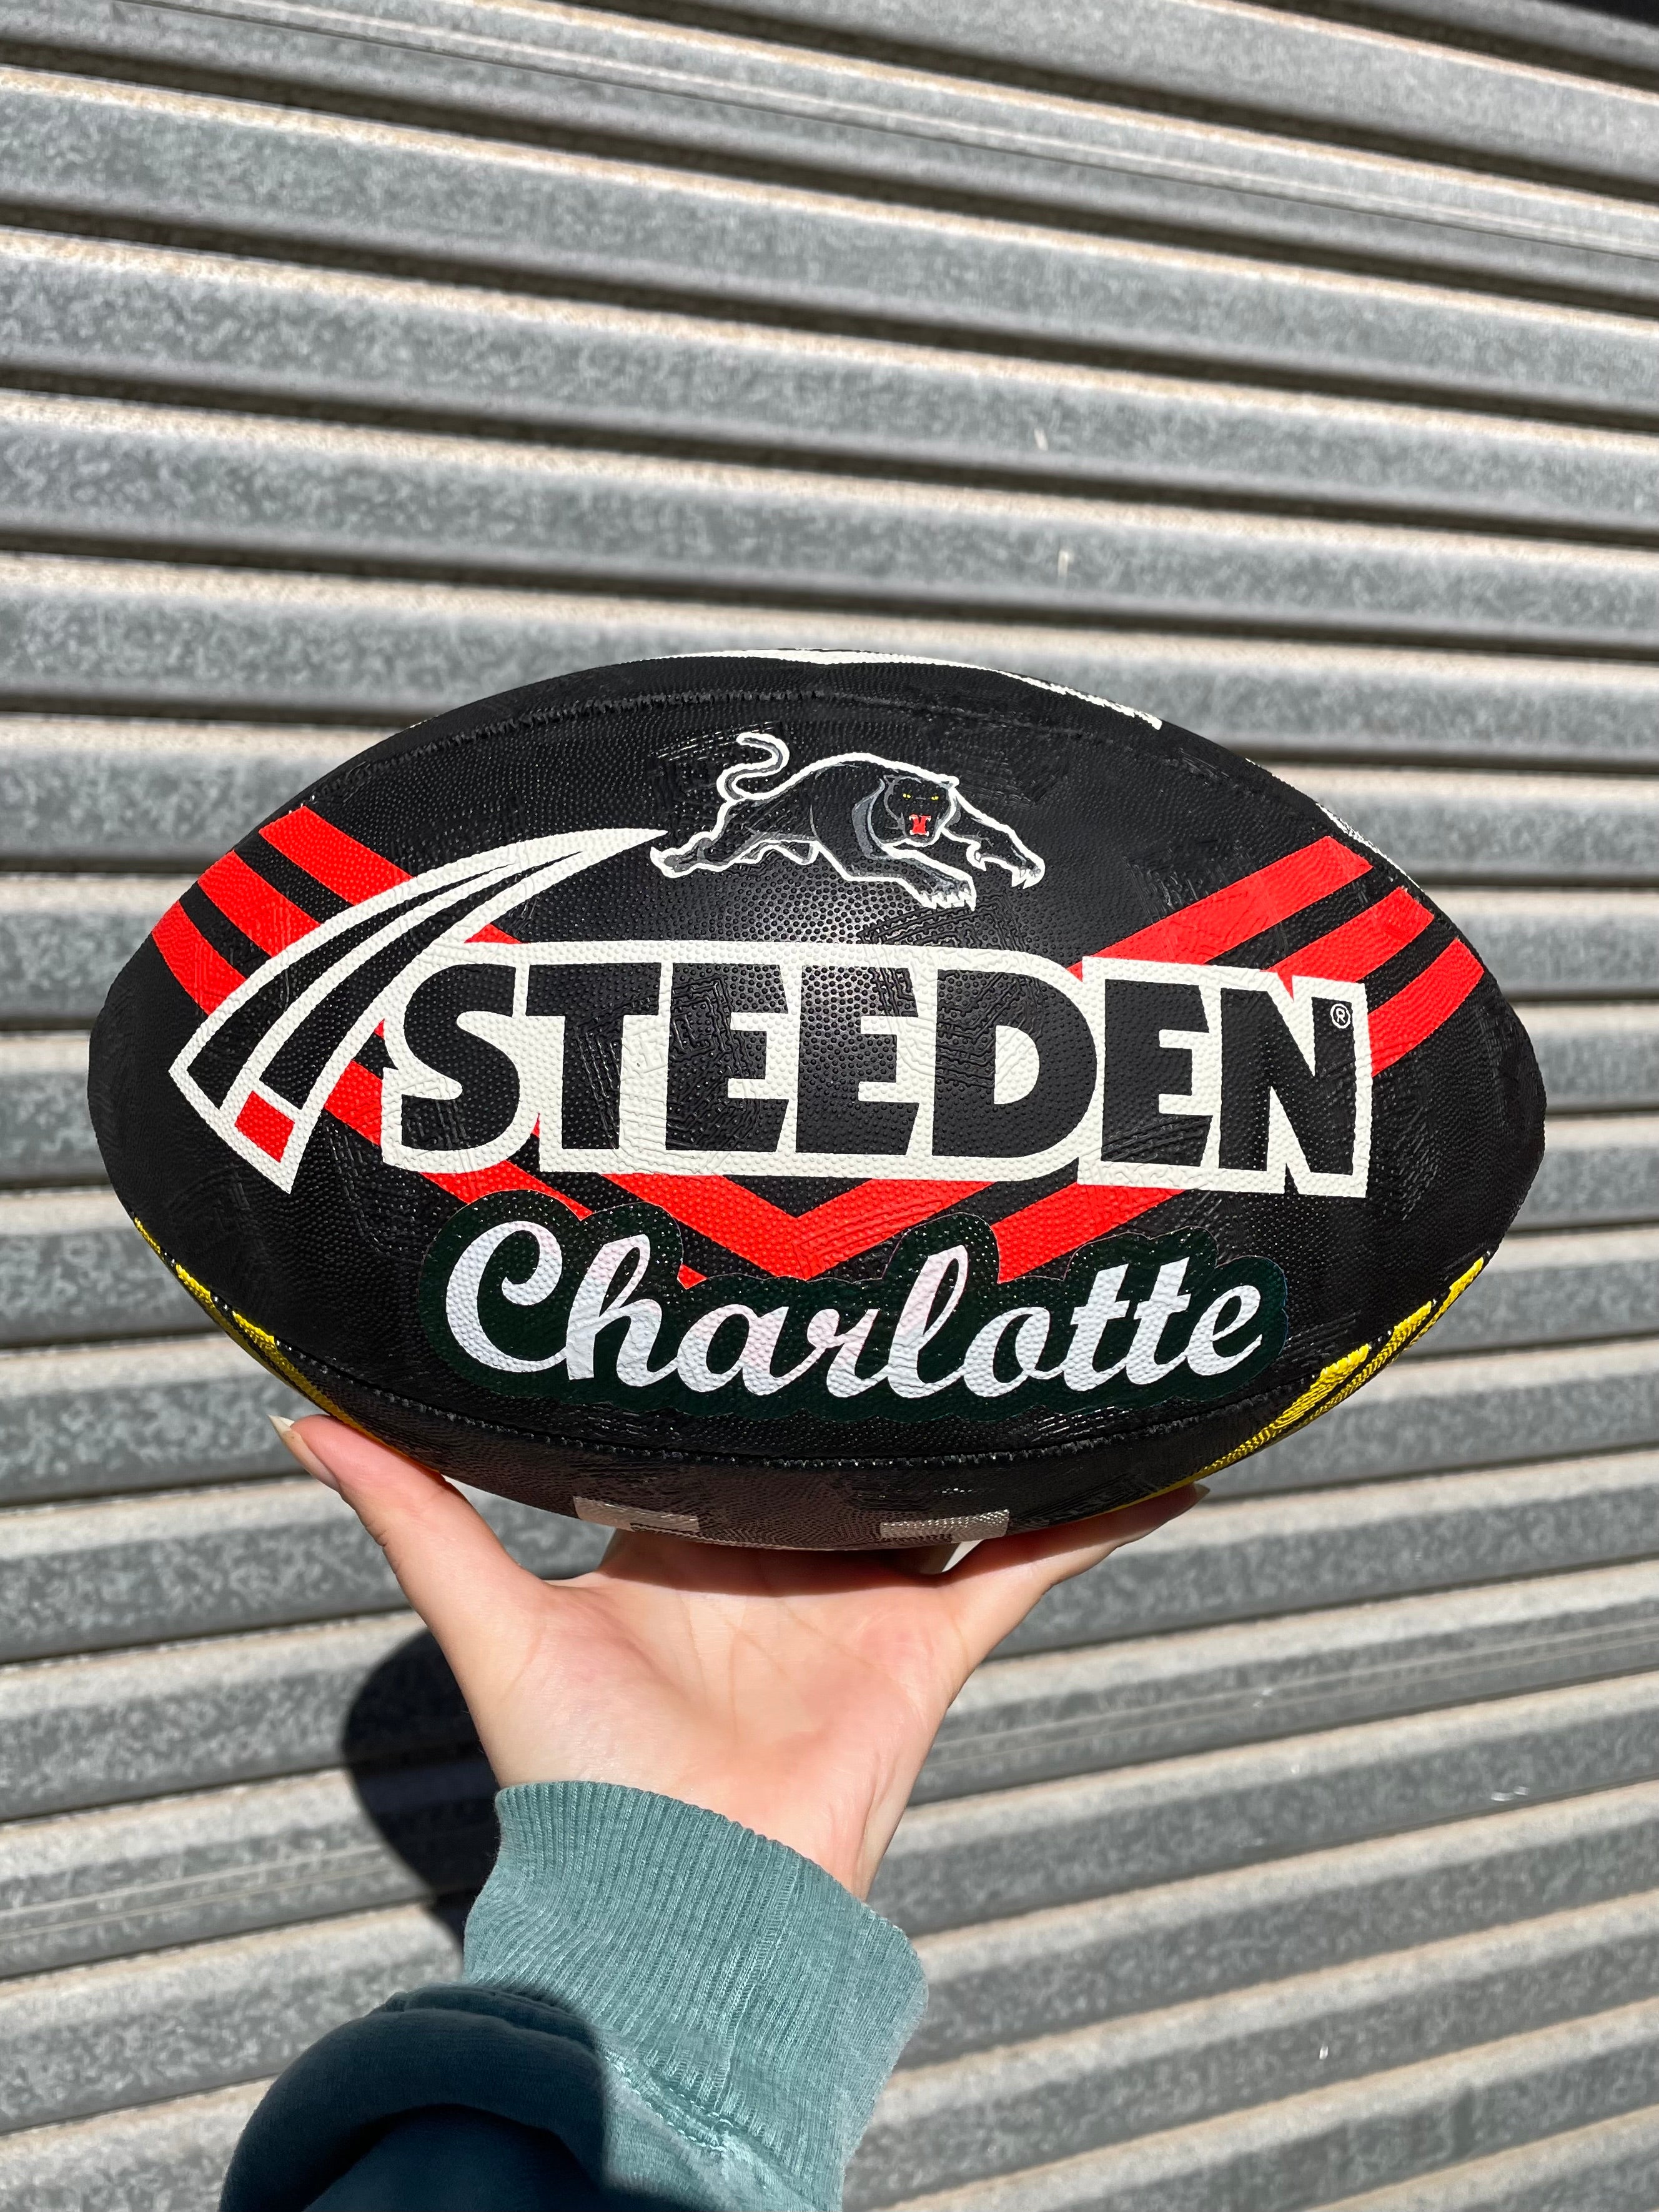 Personalised Penrith Panthers Official NRL Ball (size 5)